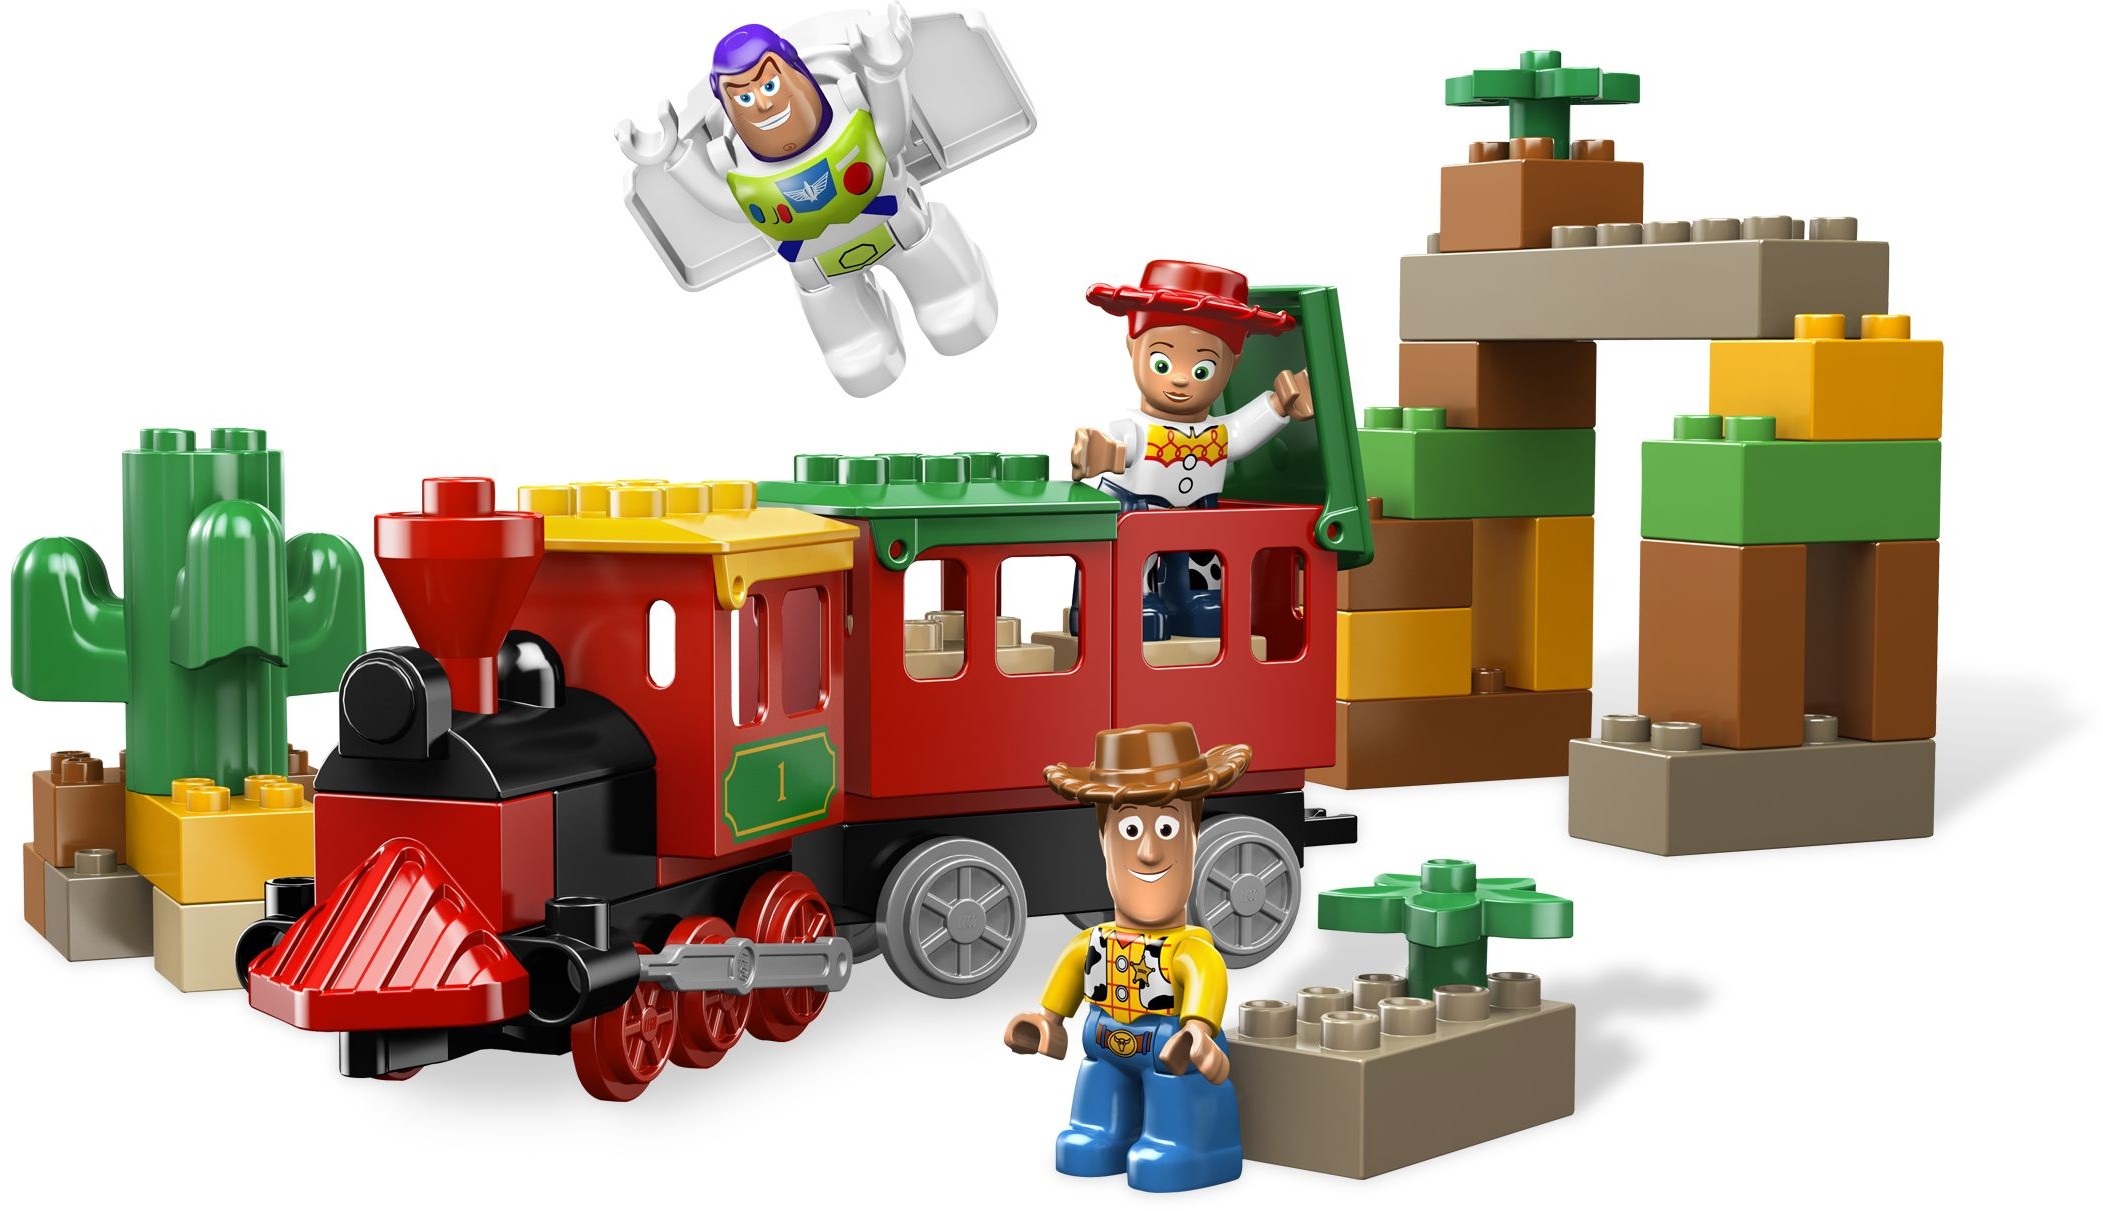 duplo toy story 2019